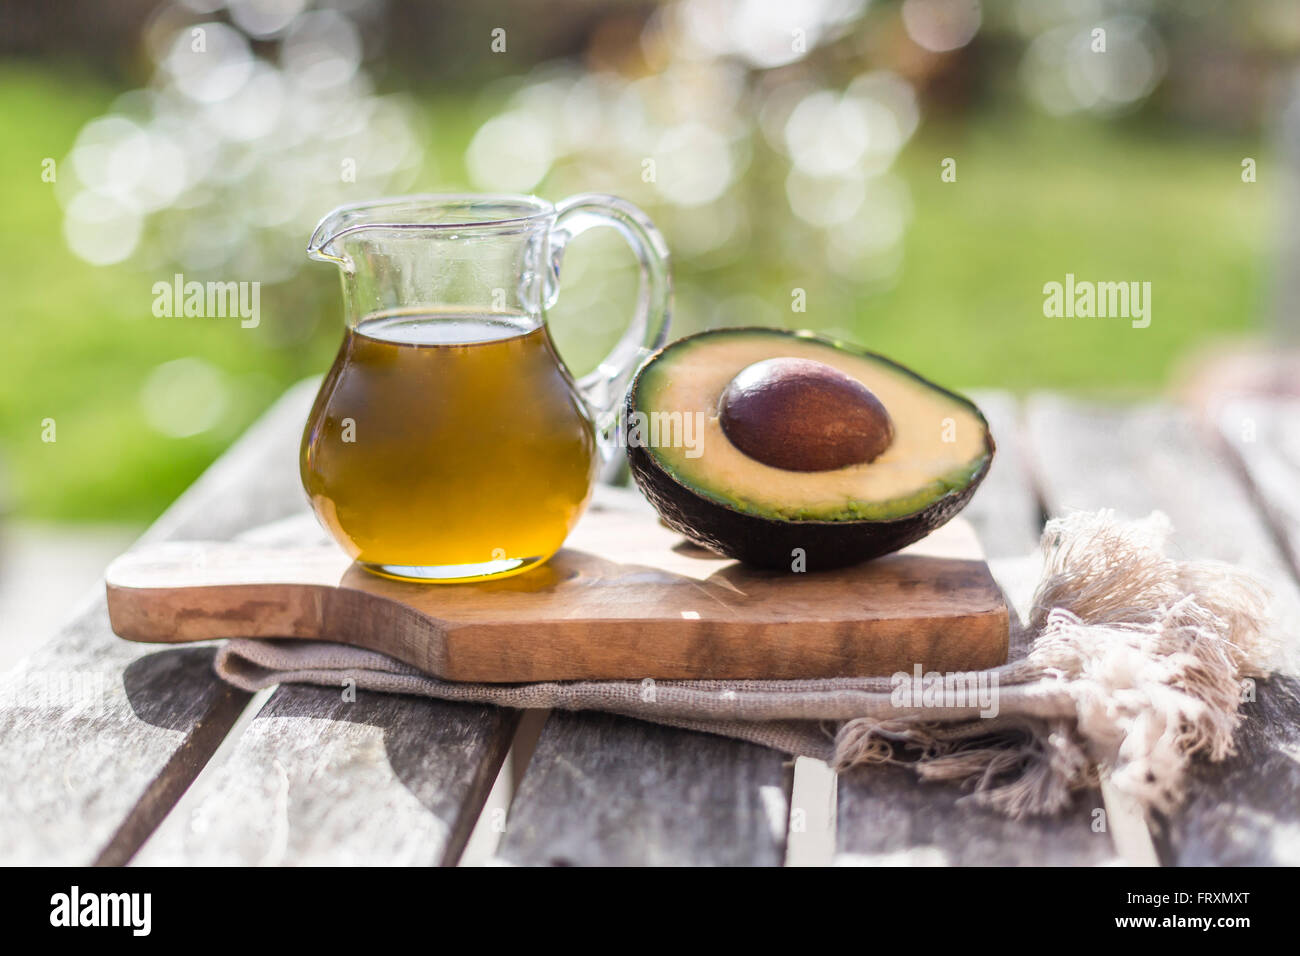 Half of avocado and glass jug of avocado oil on wooden board Stock Photo